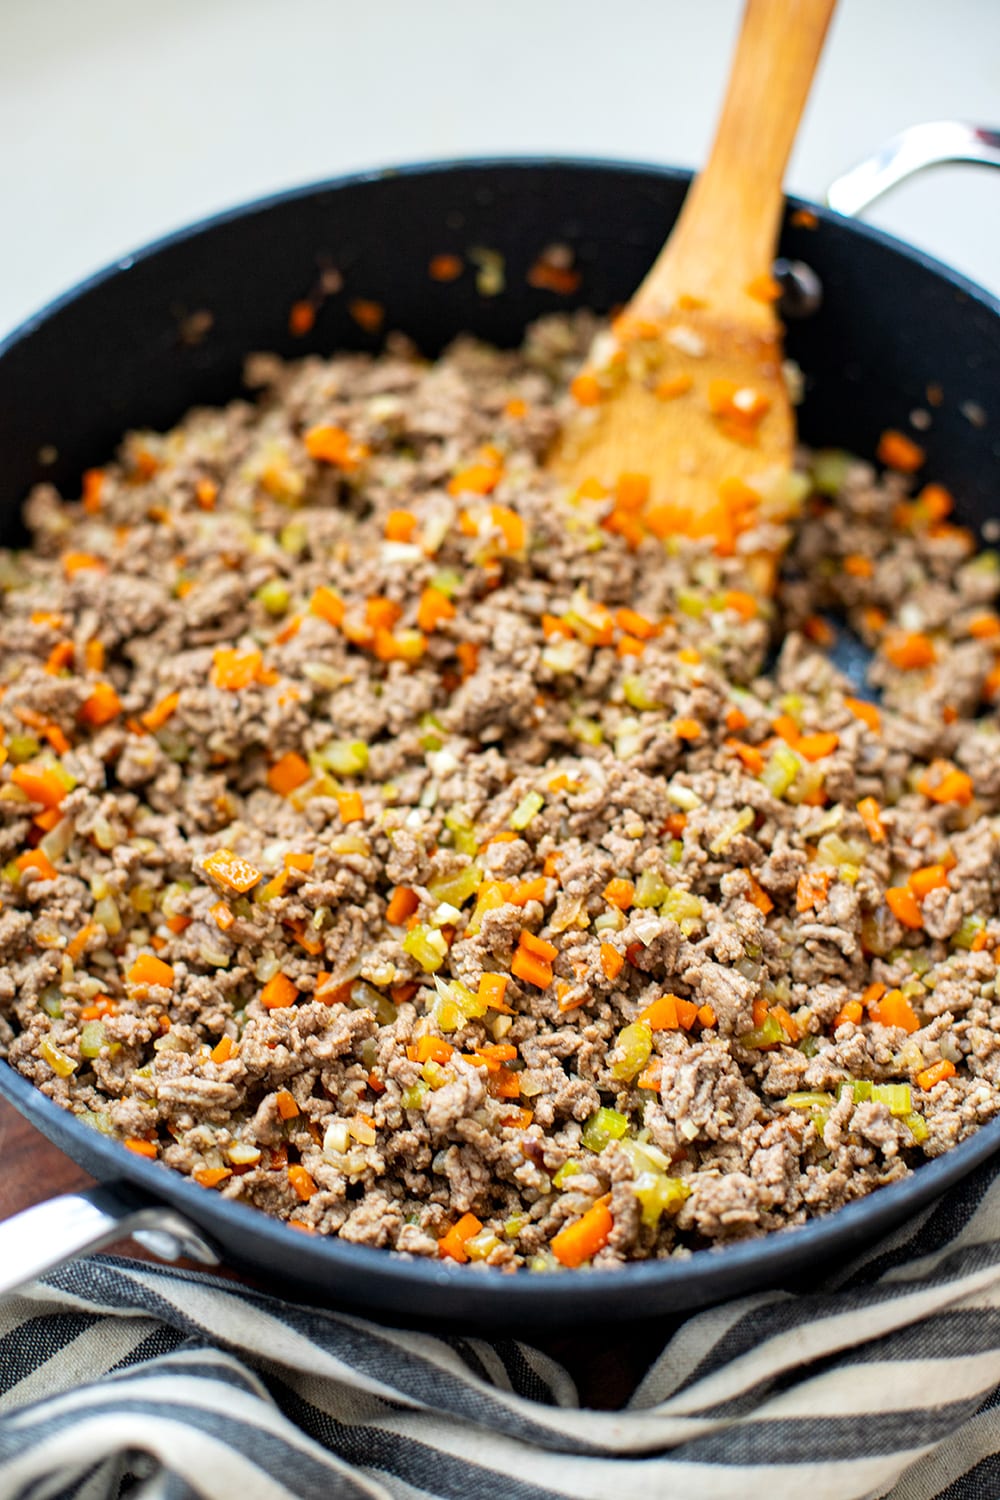 Savoury ground beef mince for meal prep